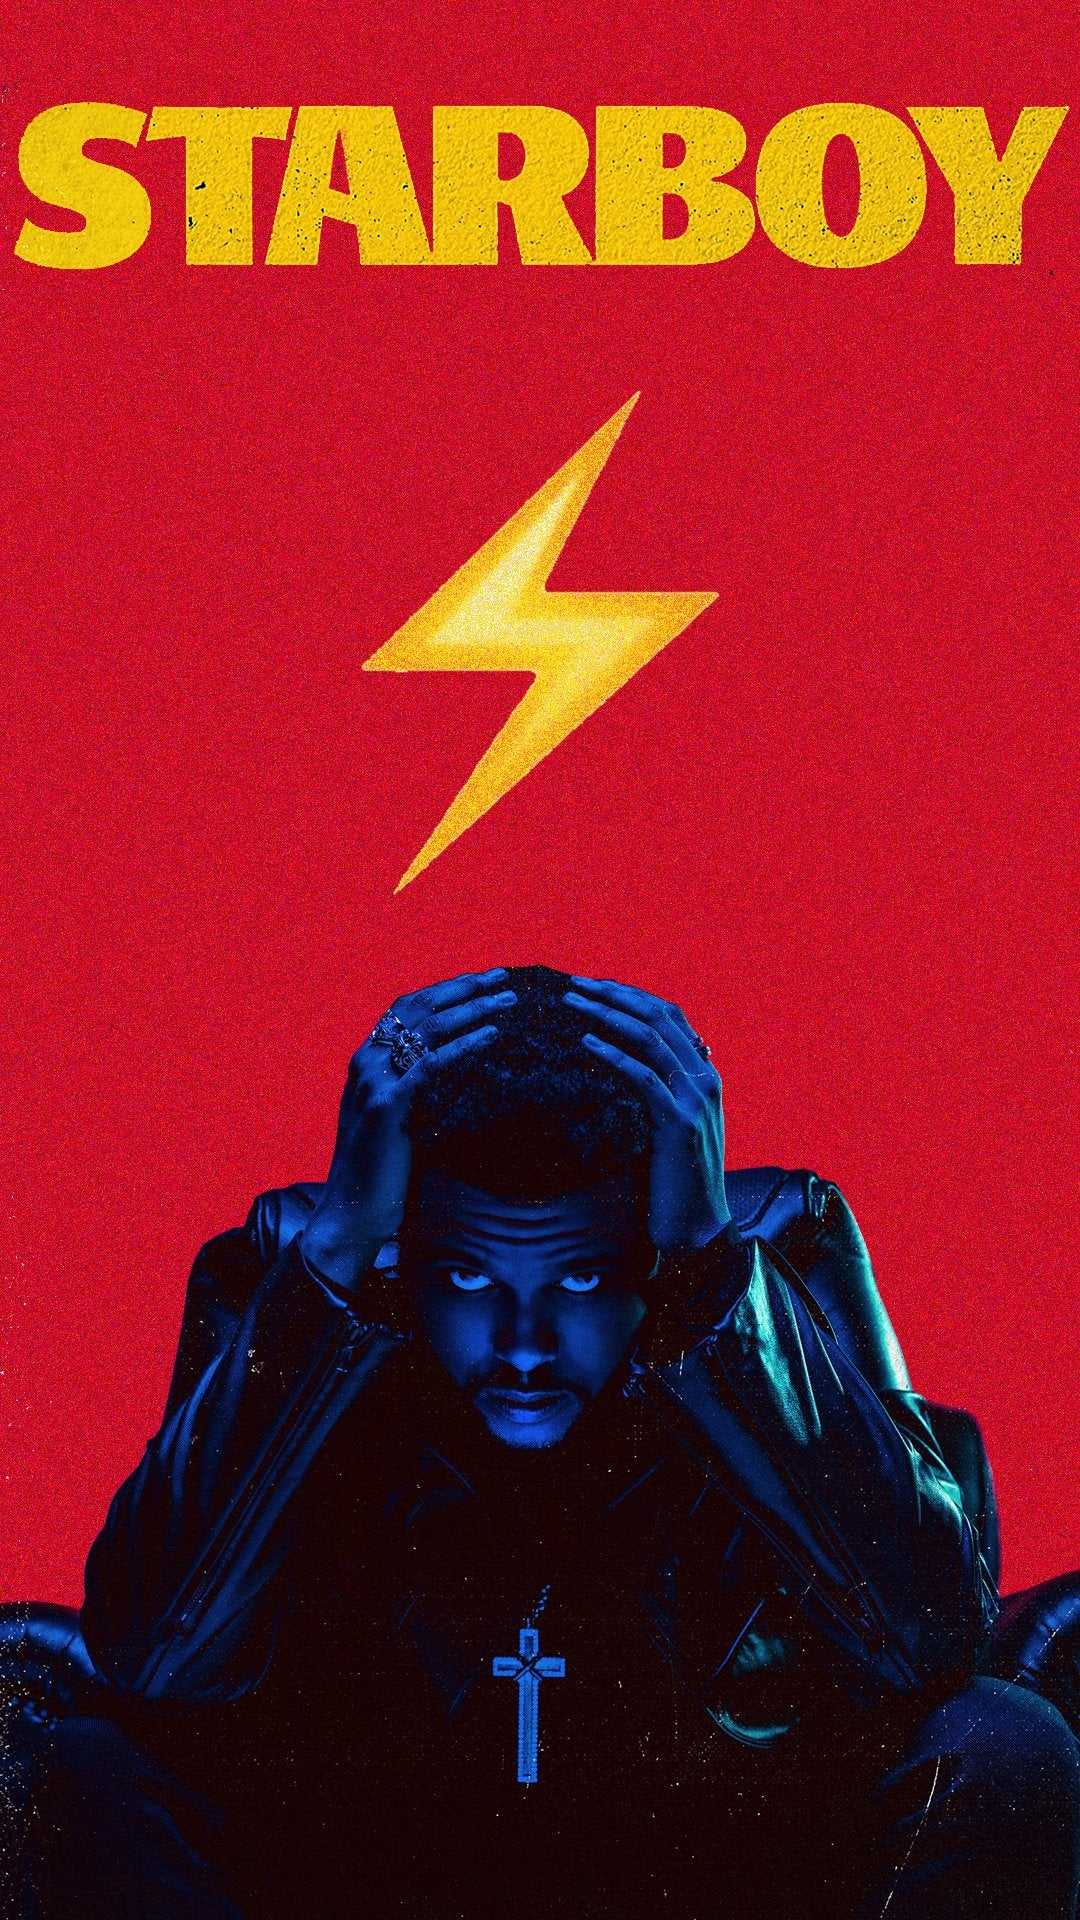 Star boy the weekend. Starboy the Weeknd обложка. The Weeknd Starboy Постер. The Weeknd Starboy album Cover. The Weeknd Starboy обложка альбома.